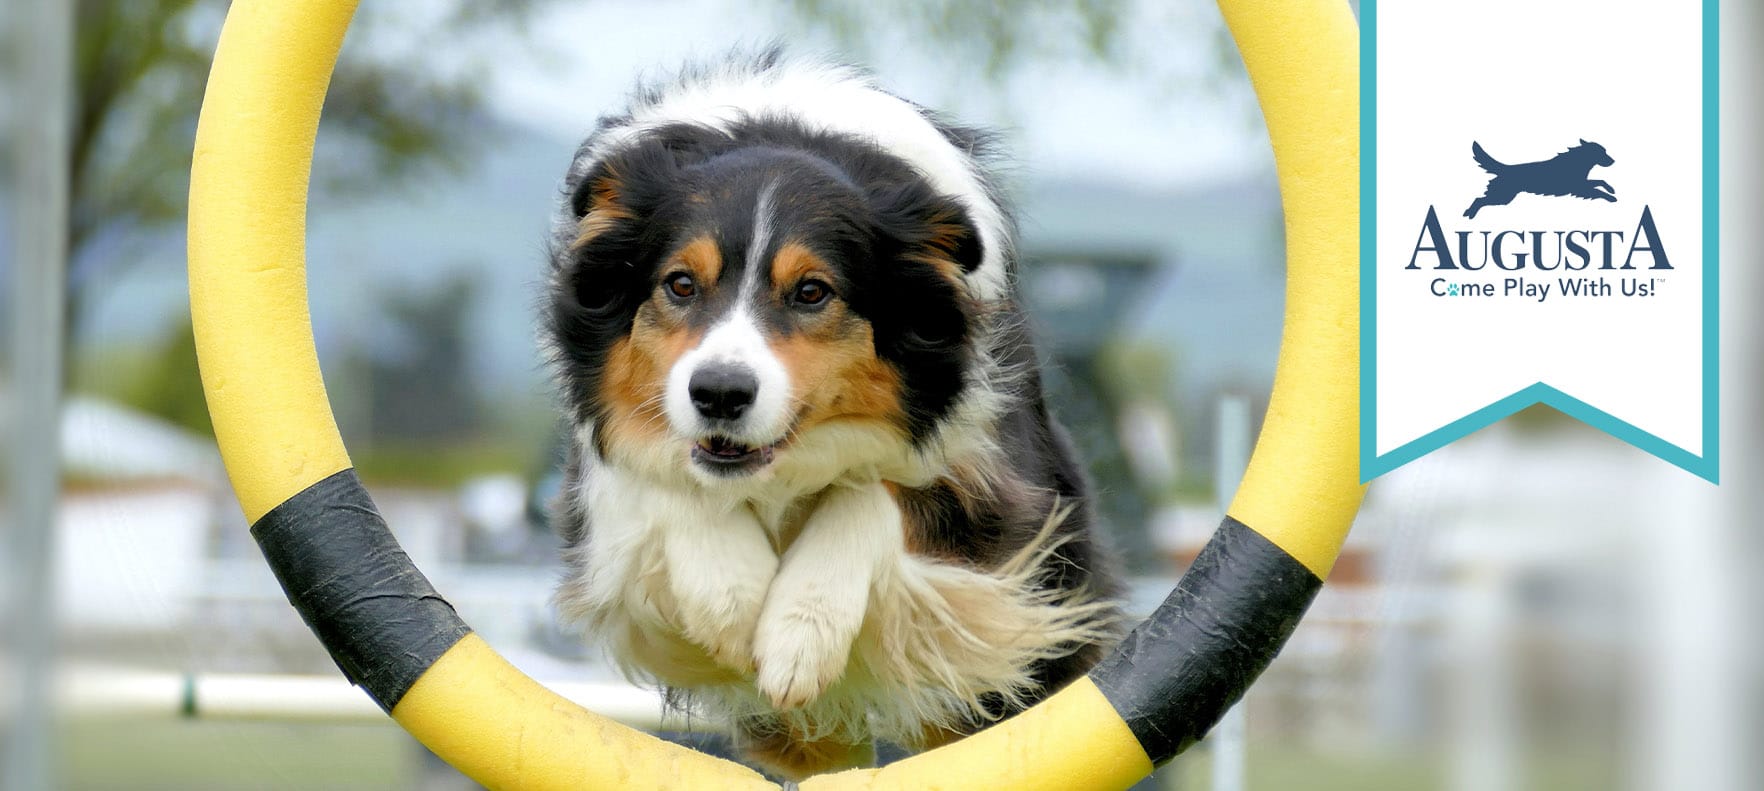 An online banner featuring a Collie jumping through a hoop in an agility course advertises the Play and Train program at the Augusta Dog Training locations in Edina, Wayzata, and Long Lake, Minnesota.